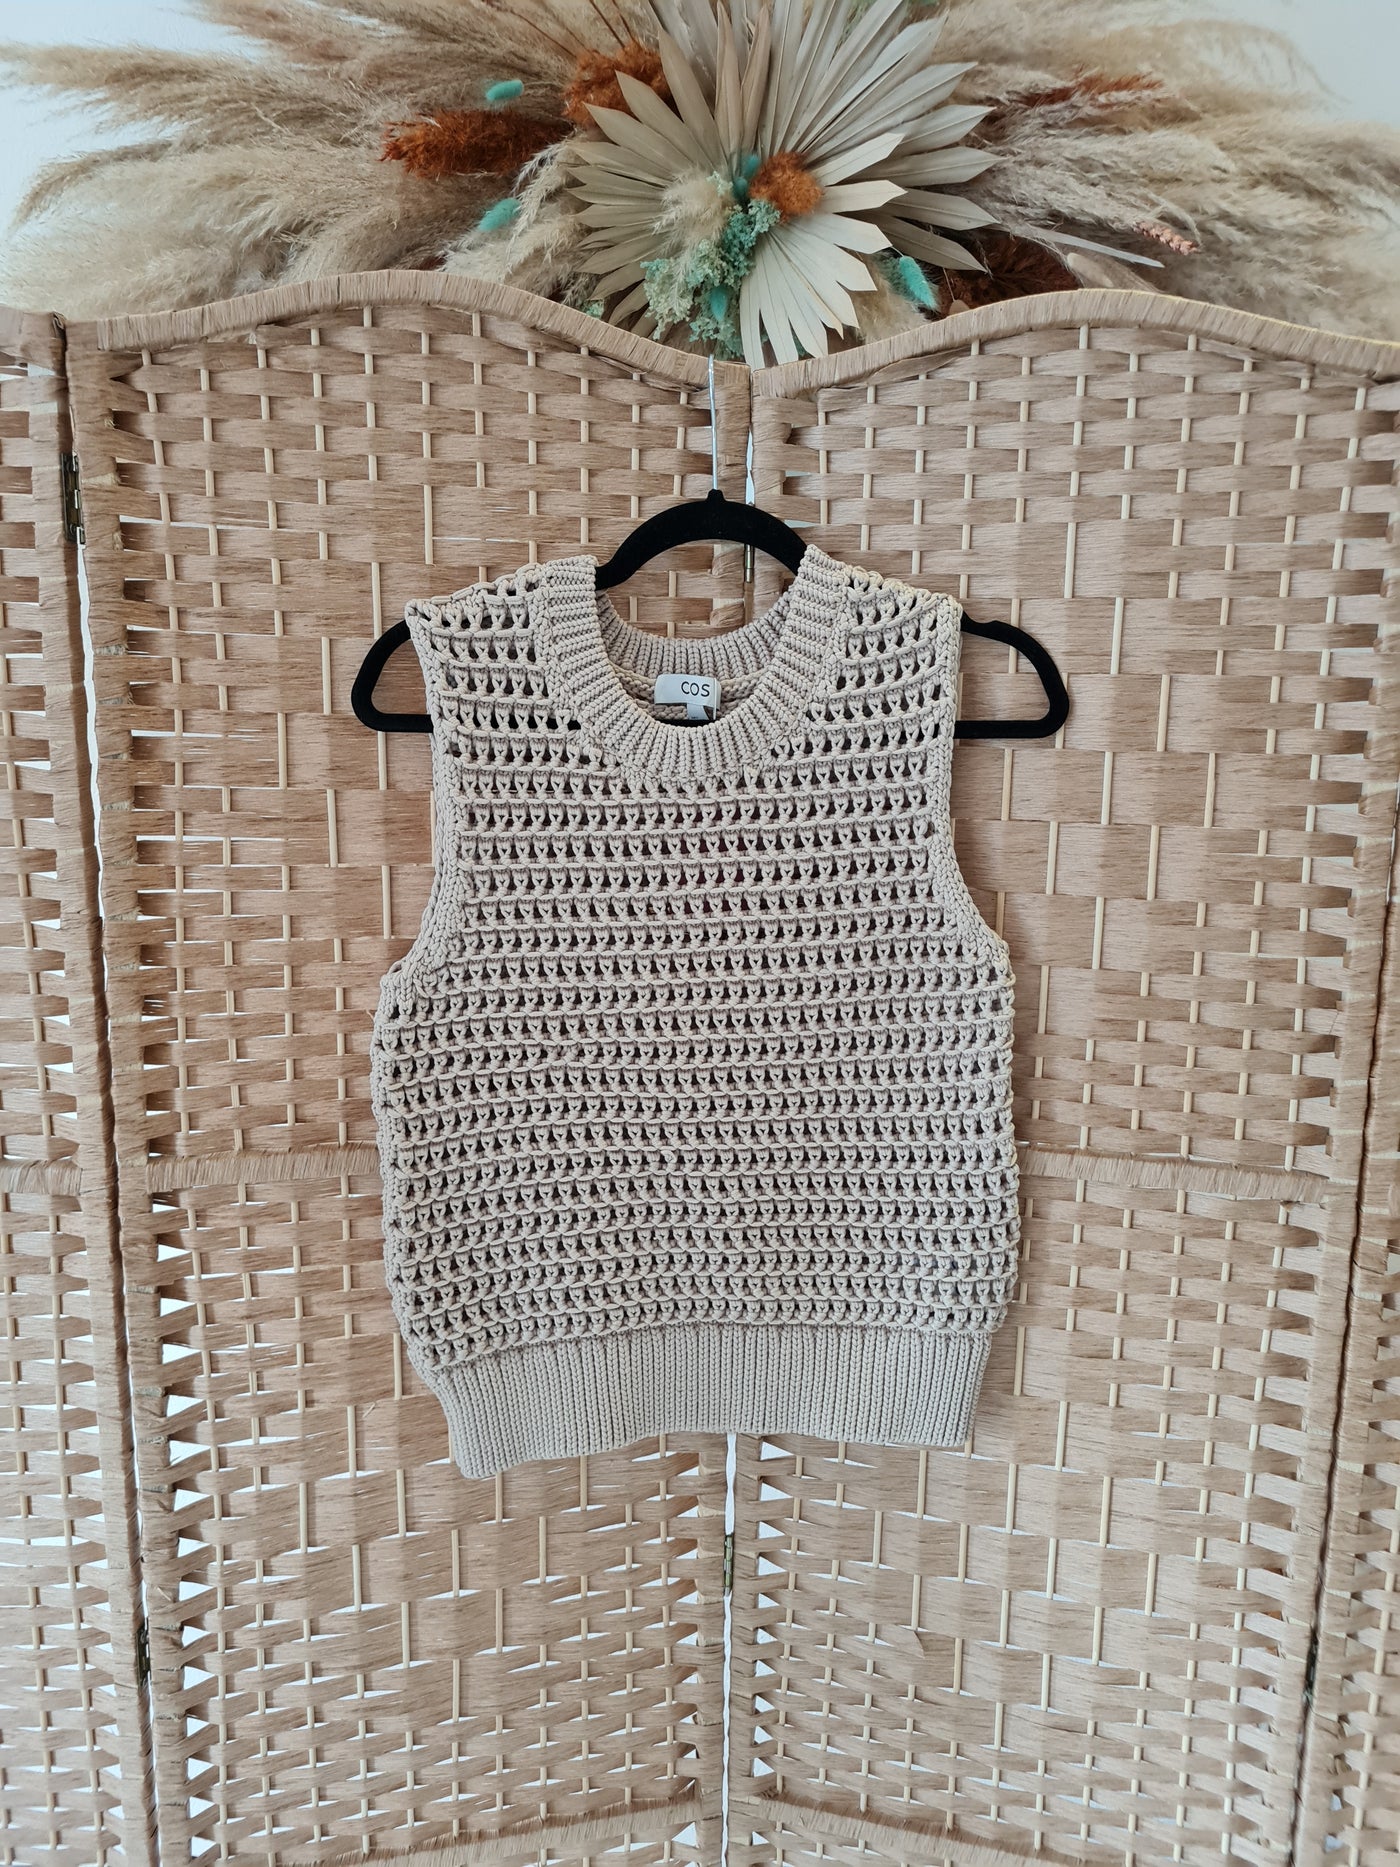 Cos Cream Knitted Vest S